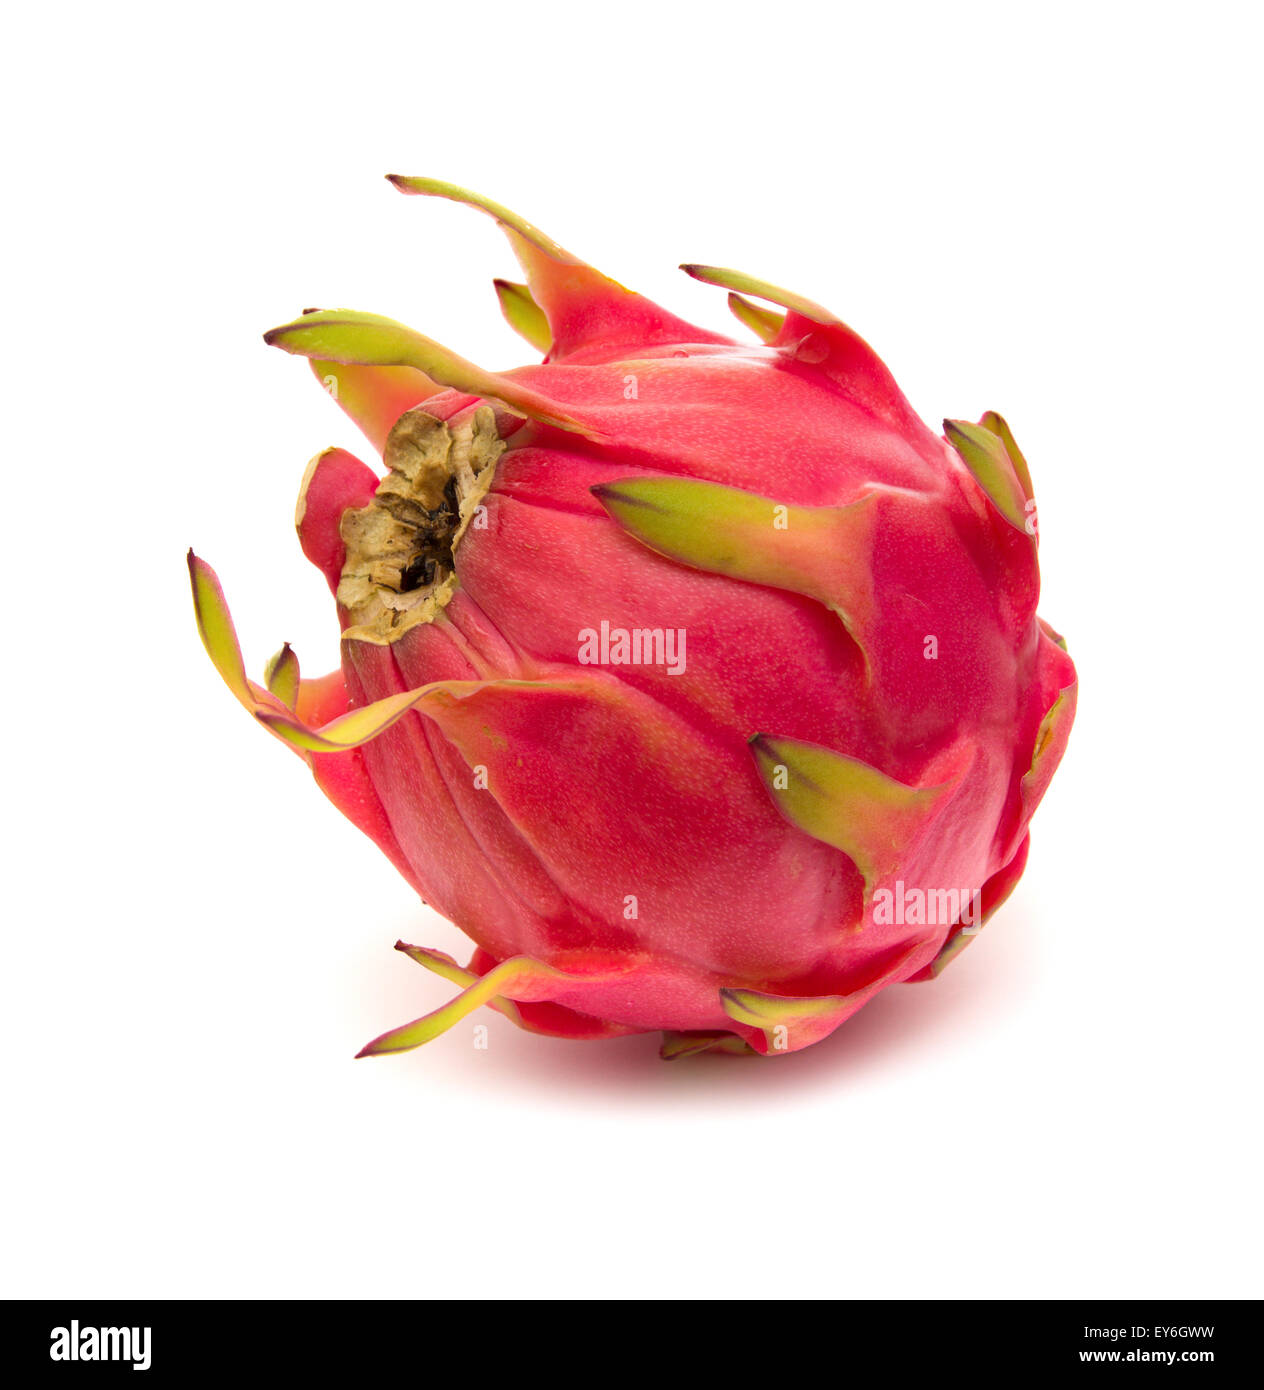 whole red dragon fruit with green scales isolated on white Stock Photo